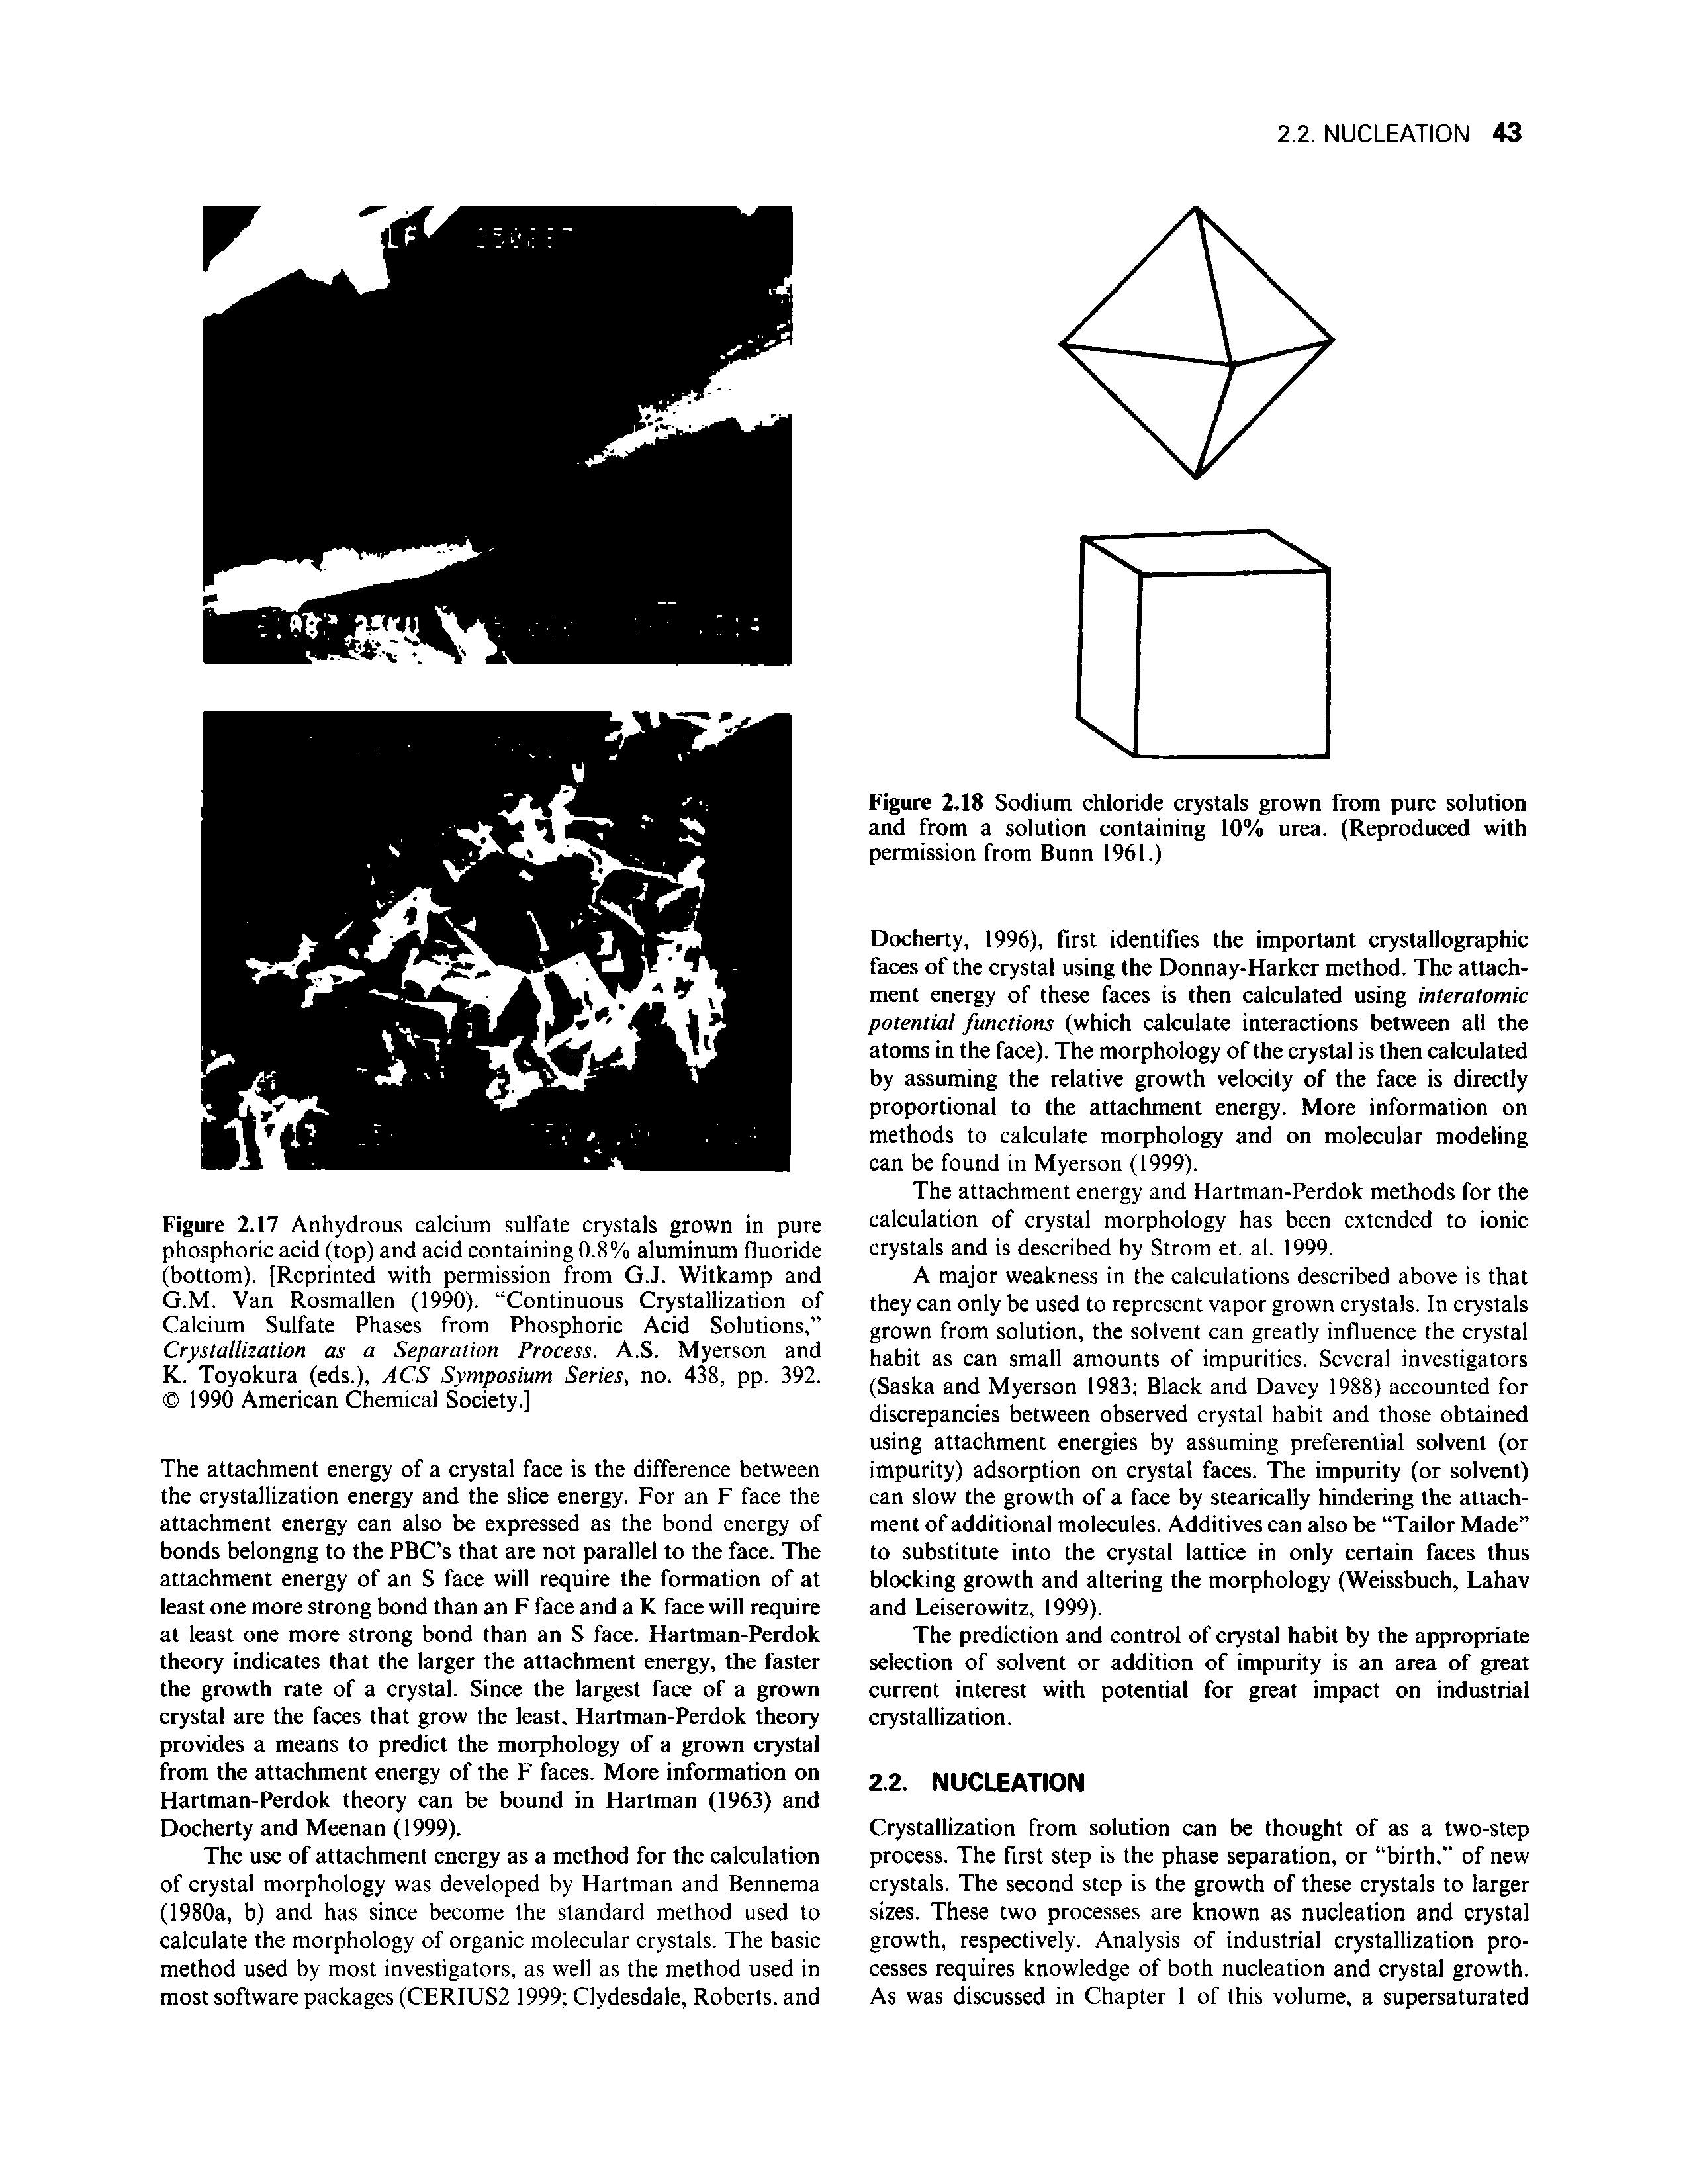 Figure 2.17 Anhydrous calcium sulfate crystals grown in pure phosphoric acid (top) and acid containing 0.8% aluminum fluoride (bottom). [Reprinted with permission from G.J. Witkamp and G.M. Van Rosmallen (1990). Continuous Crystallization of Calcium Sulfate Phases from Phosphoric Acid Solutions, Crystallization as a Separation Process. A.S. Myerson and K. Toyokura (eds.), ACS Symposium Series, no. 438, pp, 392. 1990 American Chemical Society.]...